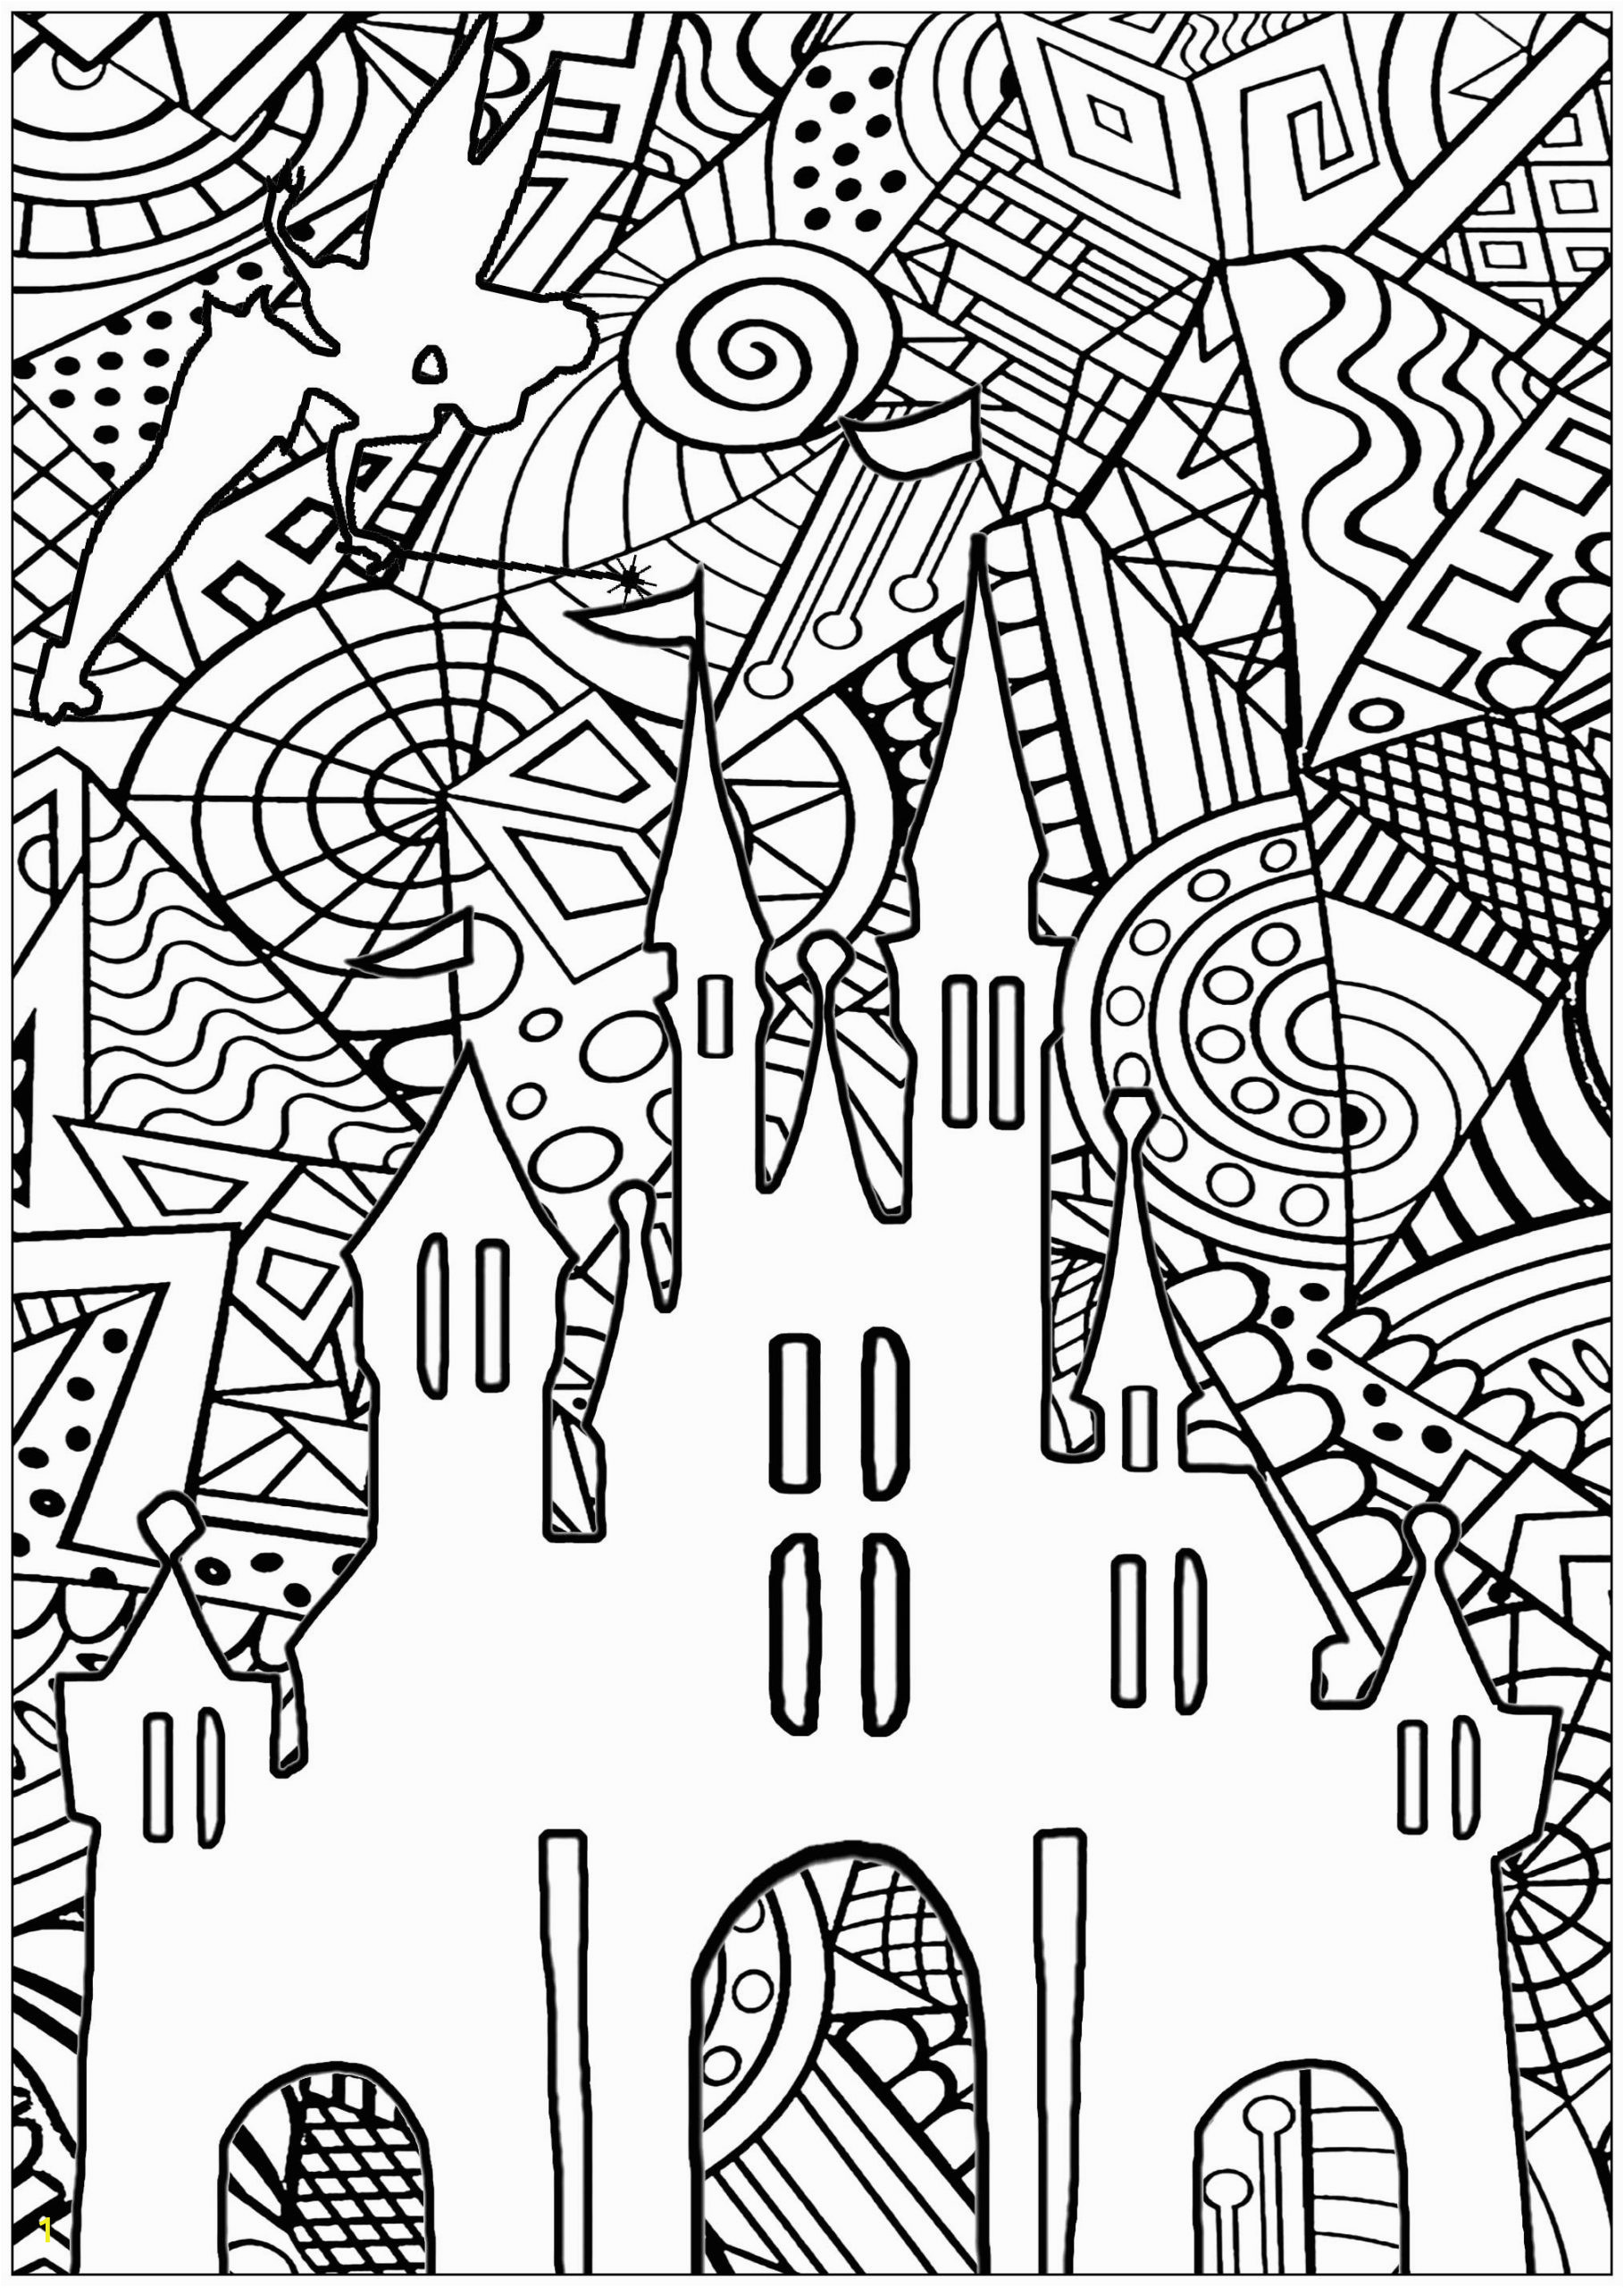 Football Helmet Coloring Page Coloring Books Disney Adult Colouring Pages Pug Coloring